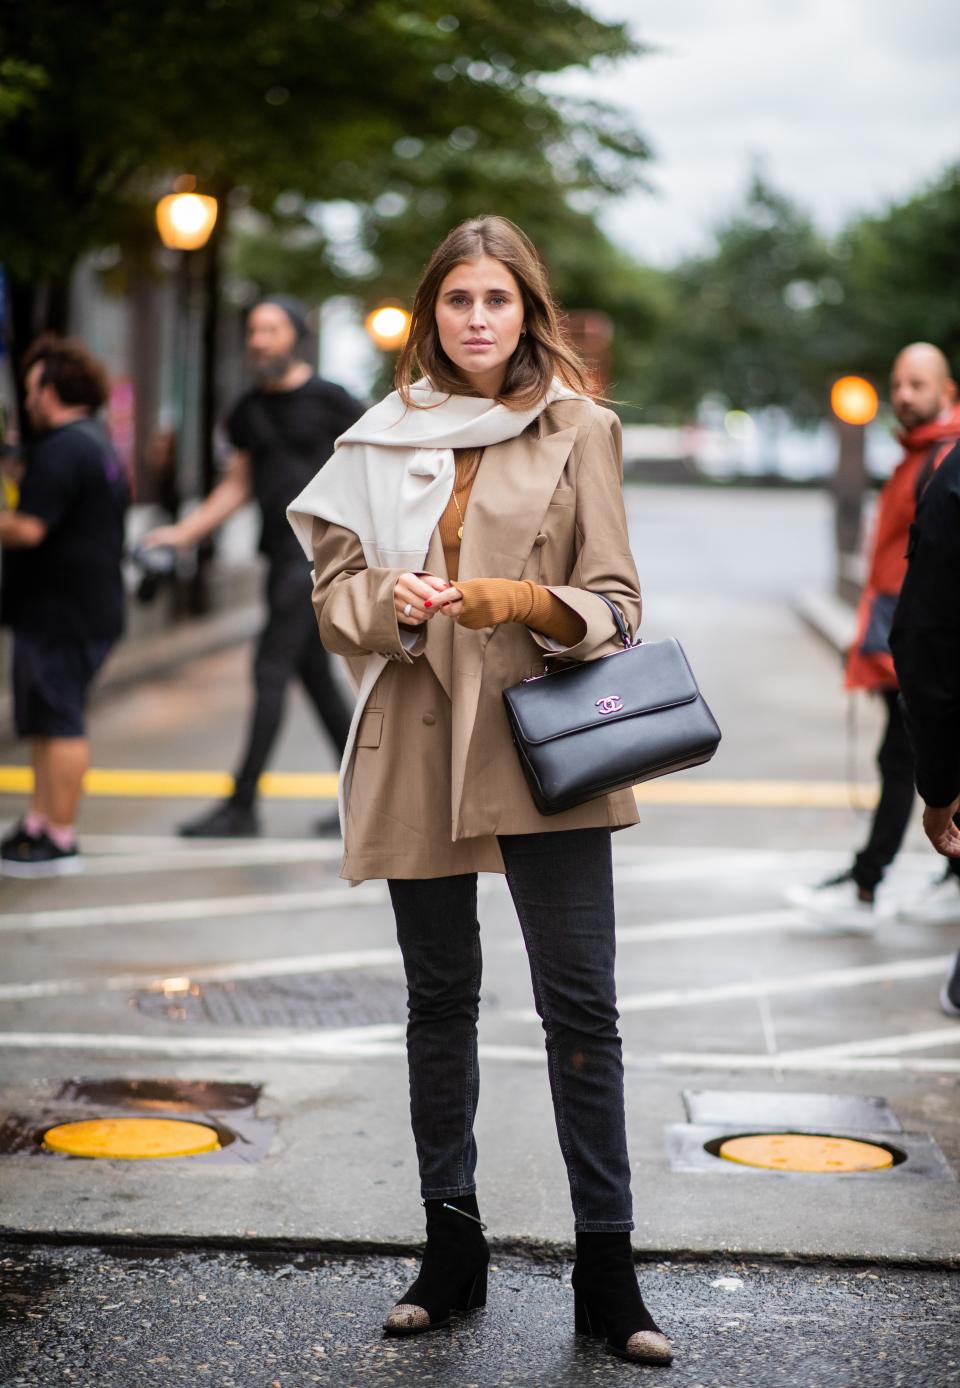 A throw-on-and-go styling trick that's also a solution for lugging around extra layers.